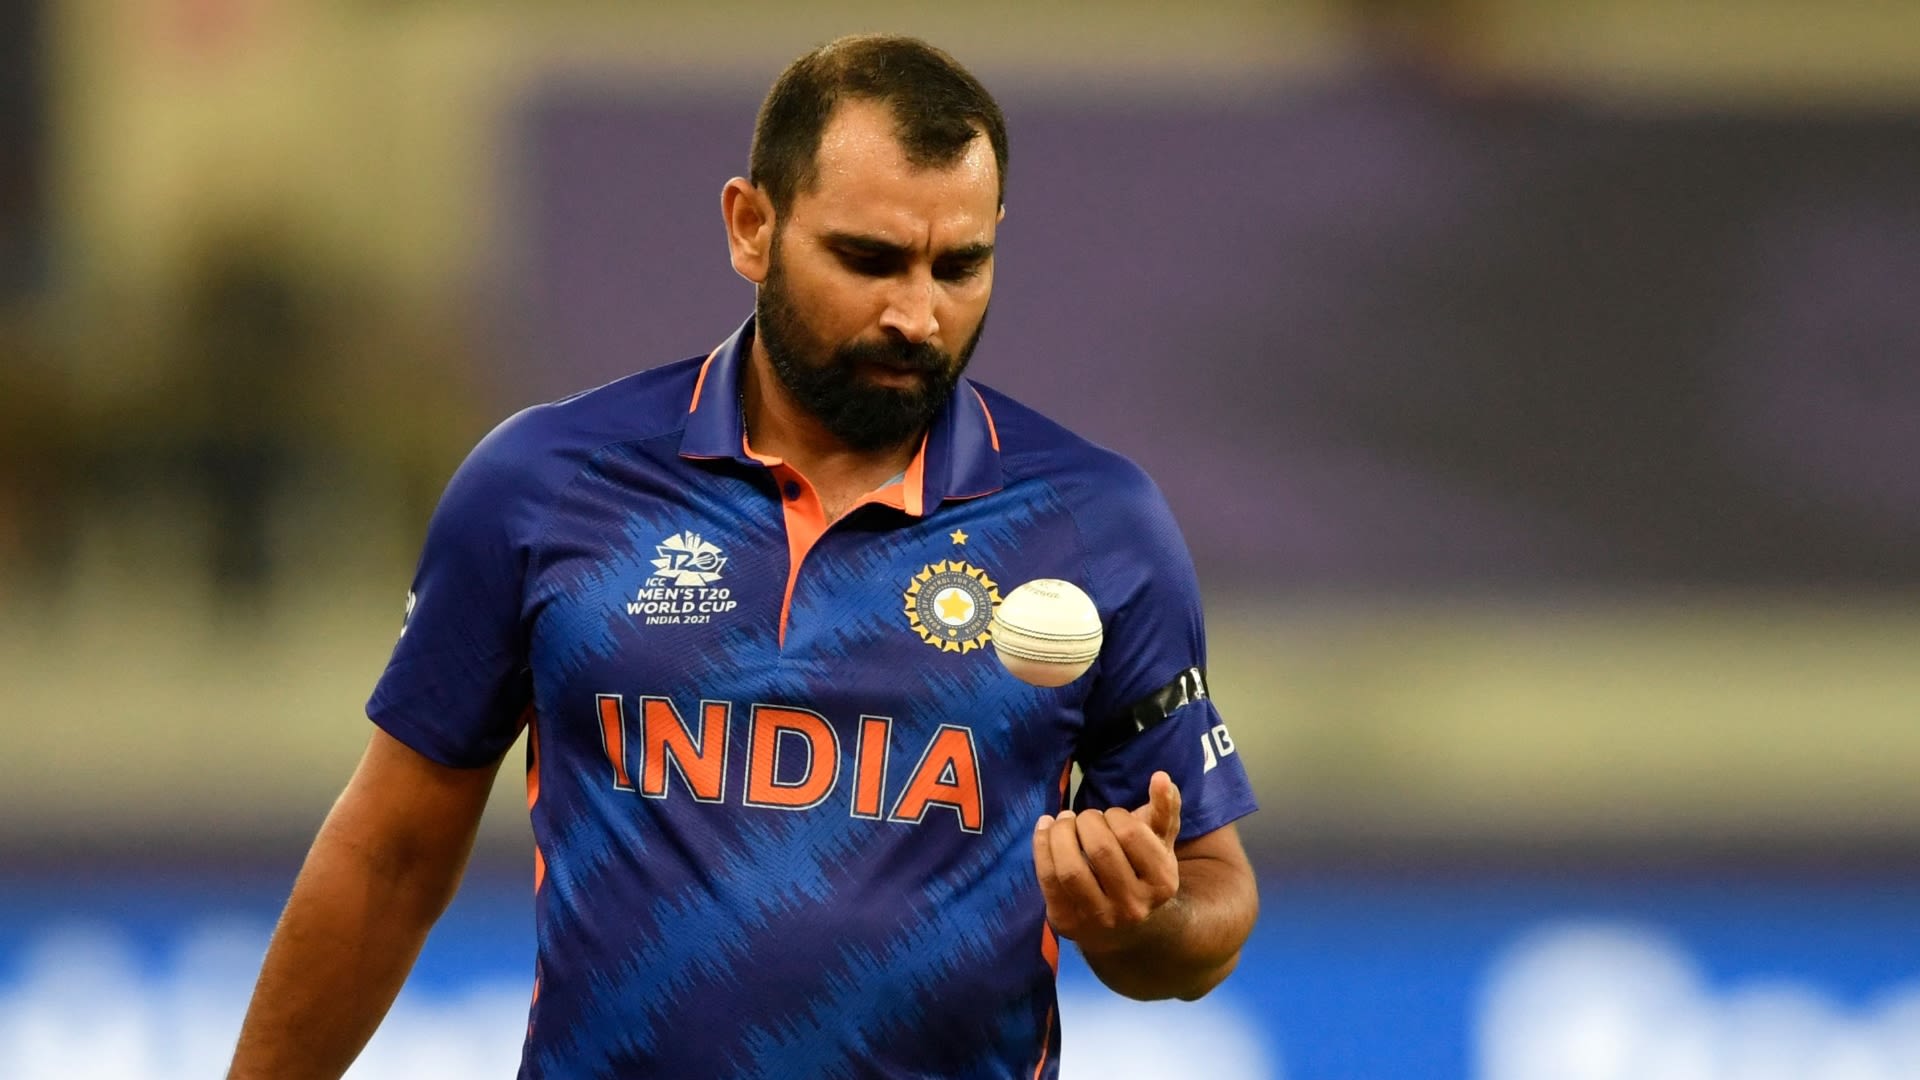 T20 World Cup 2022 - Aus vs Ind - Wanted to give him a little bit of a  challenge - Rohit Sharma on Mohammed Shami